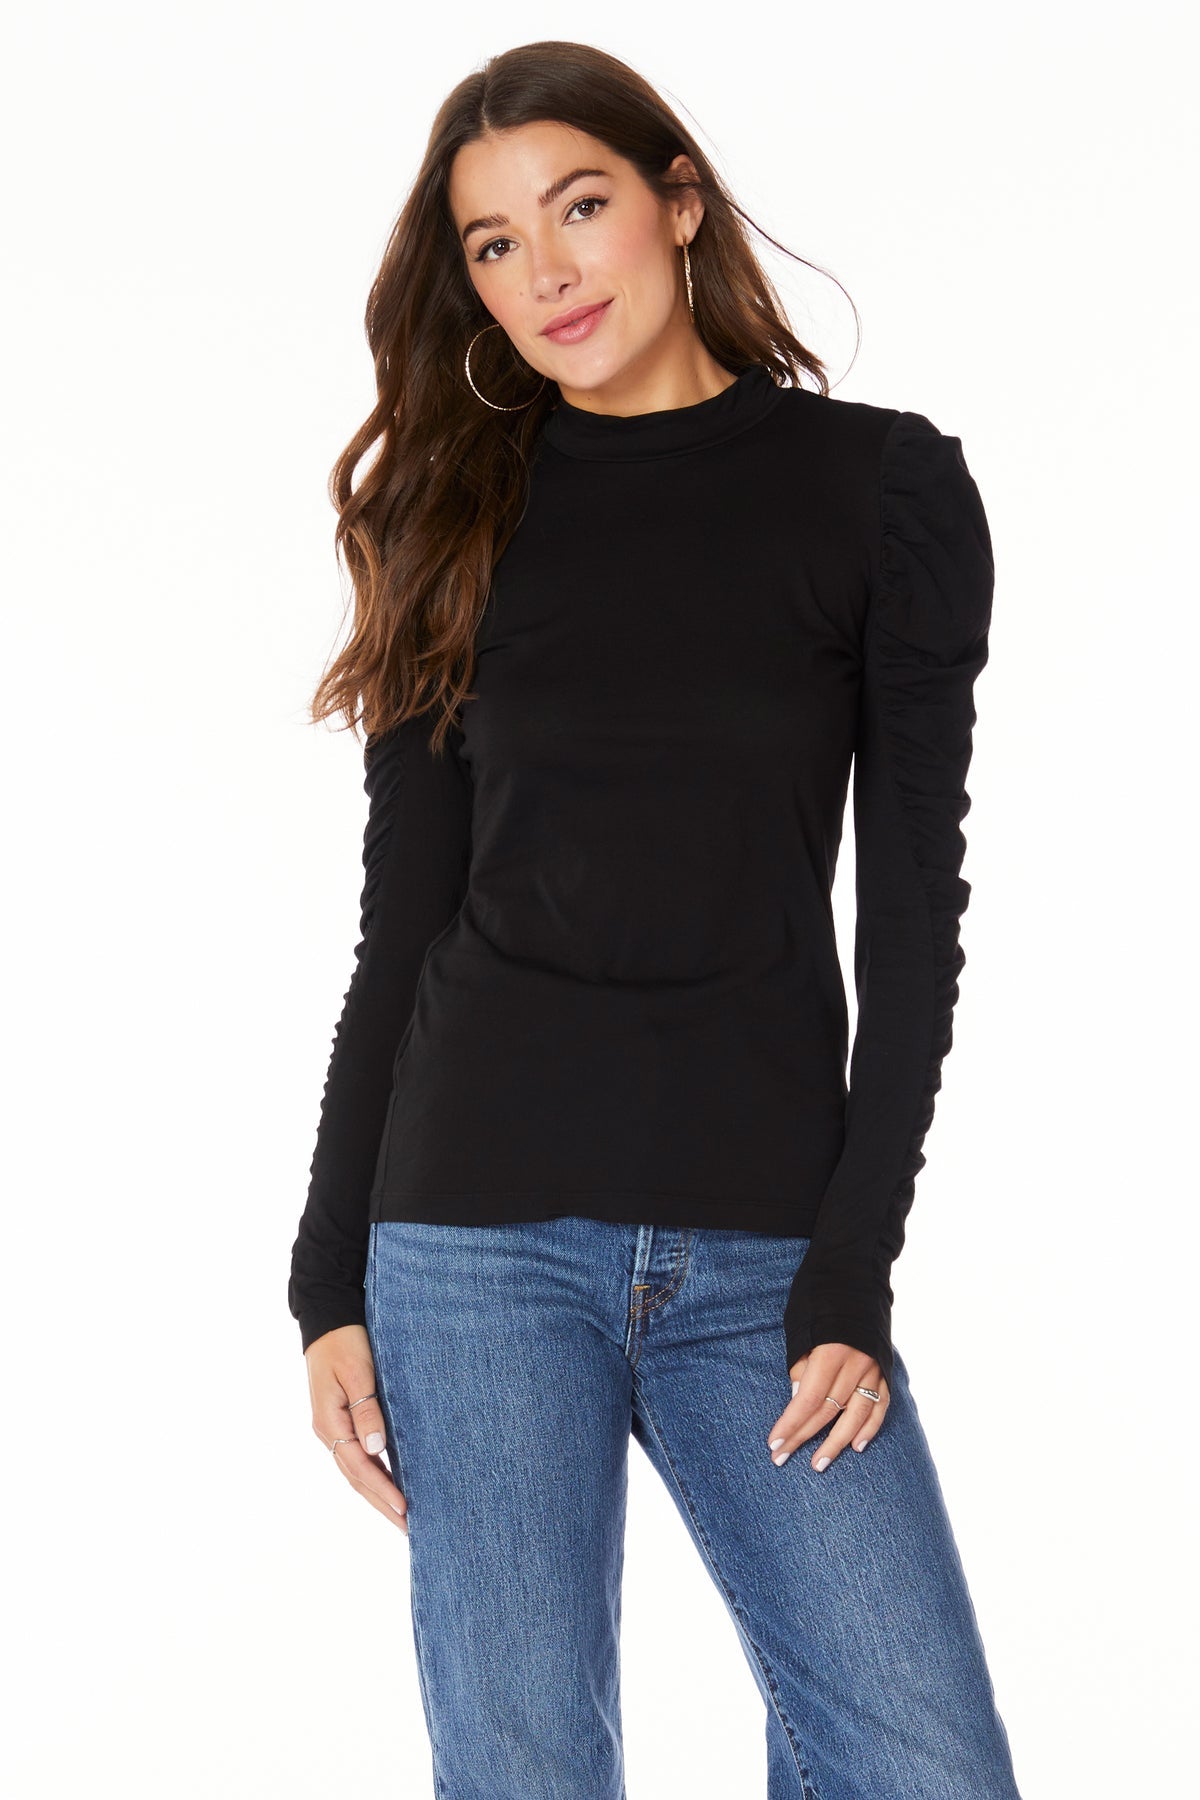 Shirred-Sleeve Turtleneck in Black and Berry Pink